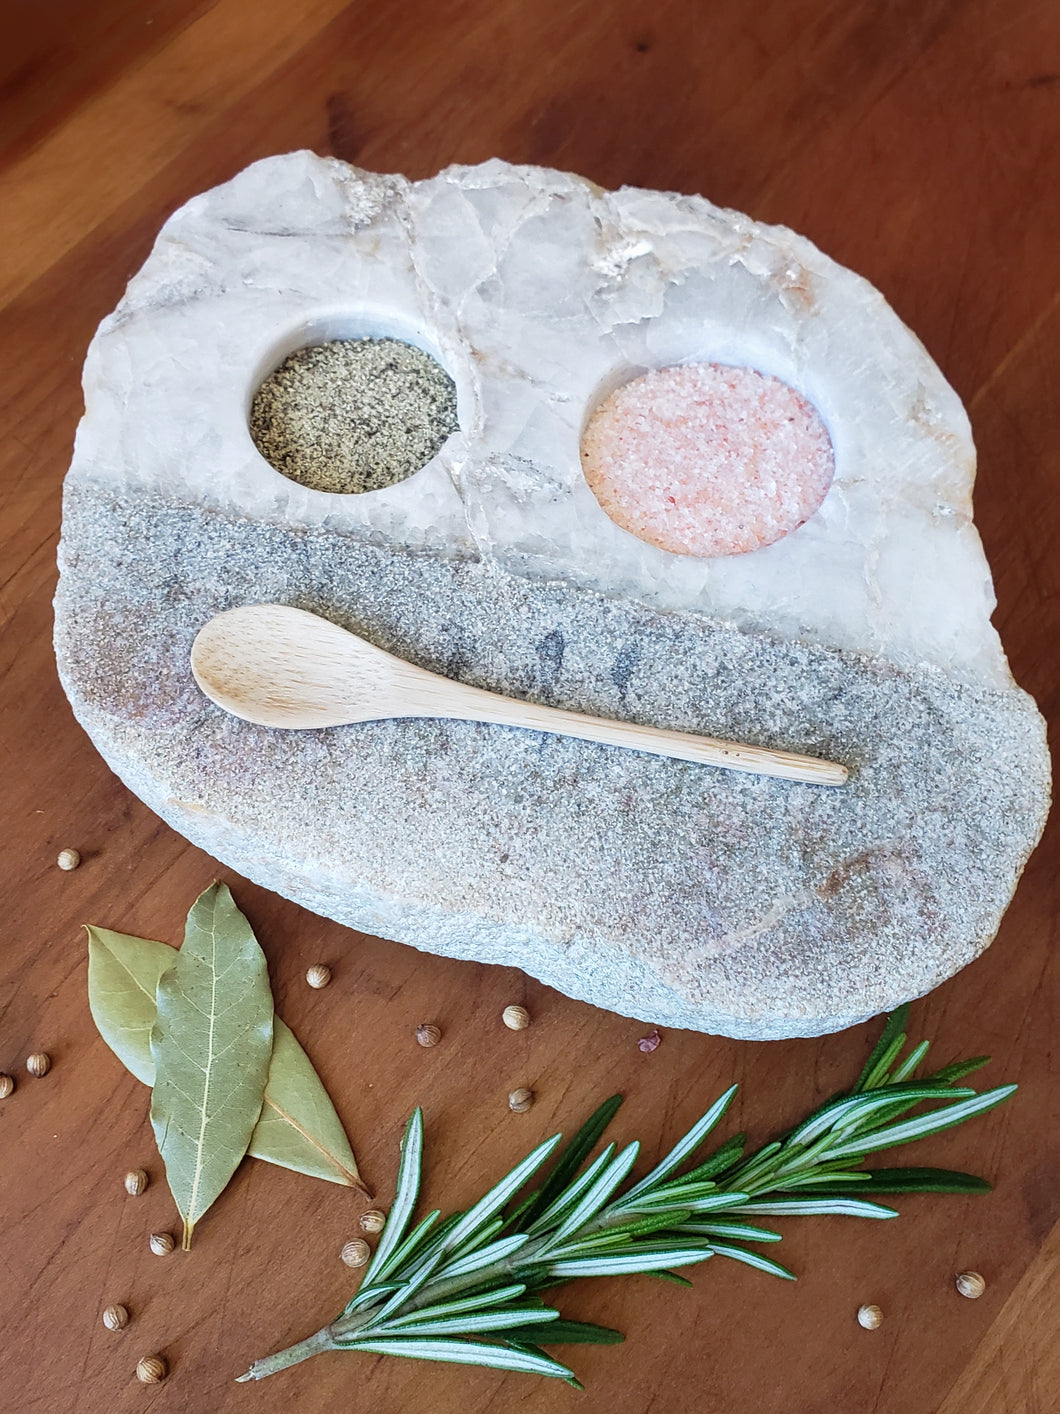 Handcrafted Stone Salt and Pepper Seasoning Pinch Pot with Hand Whittled Spoon